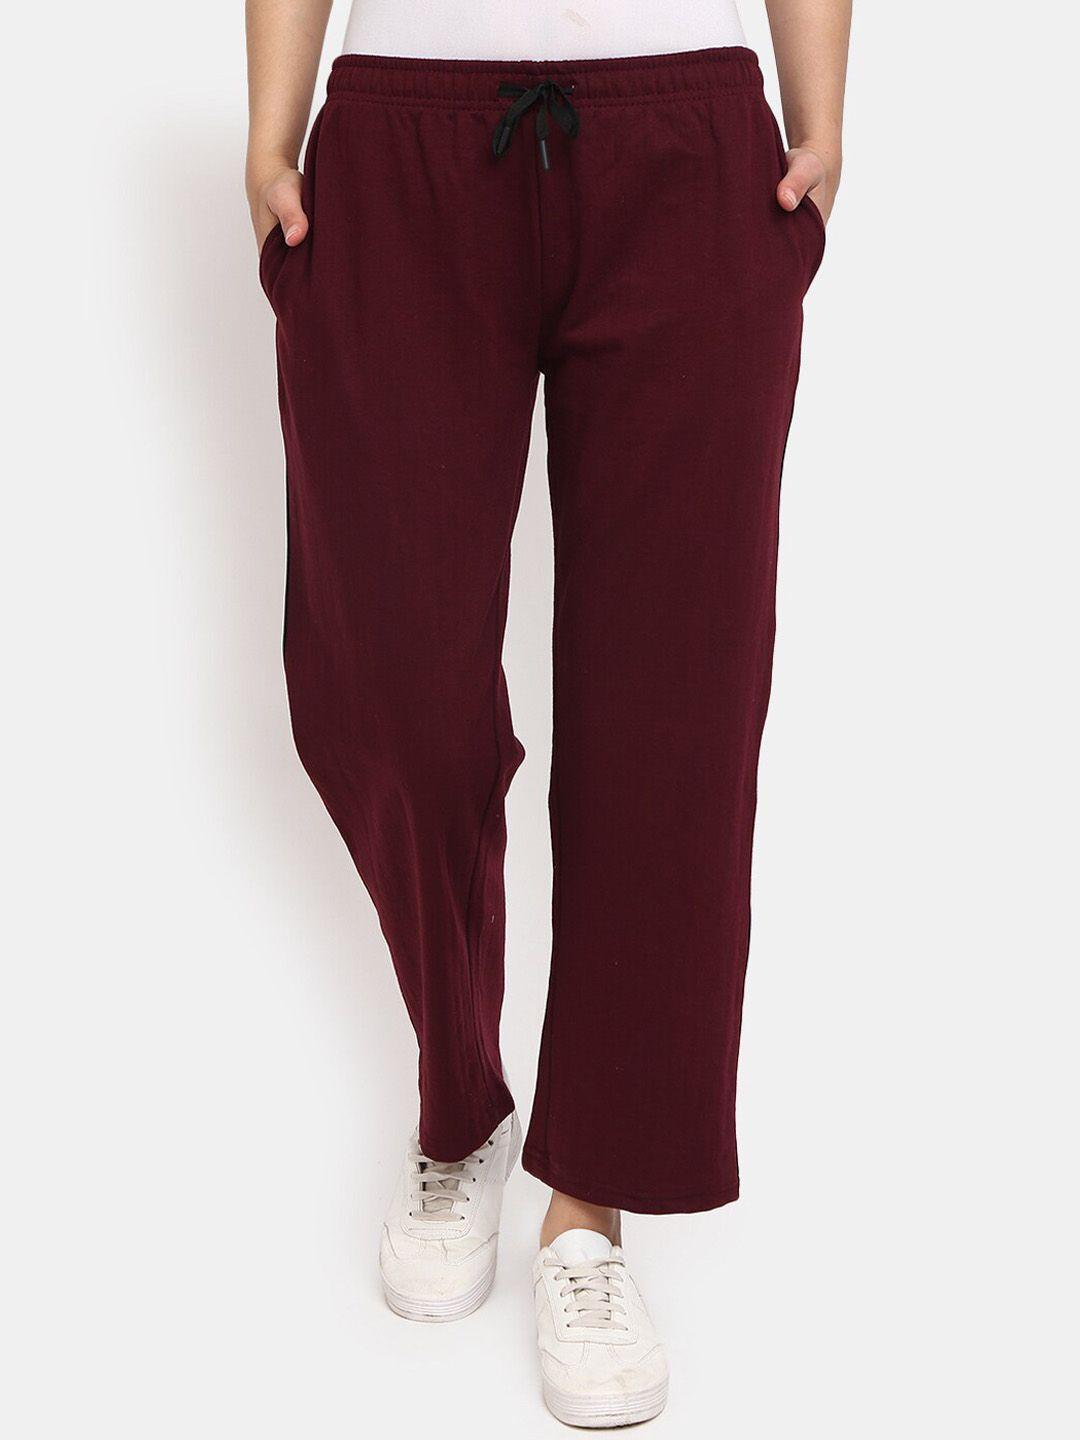 v-mart women maroon solid cotton track pant